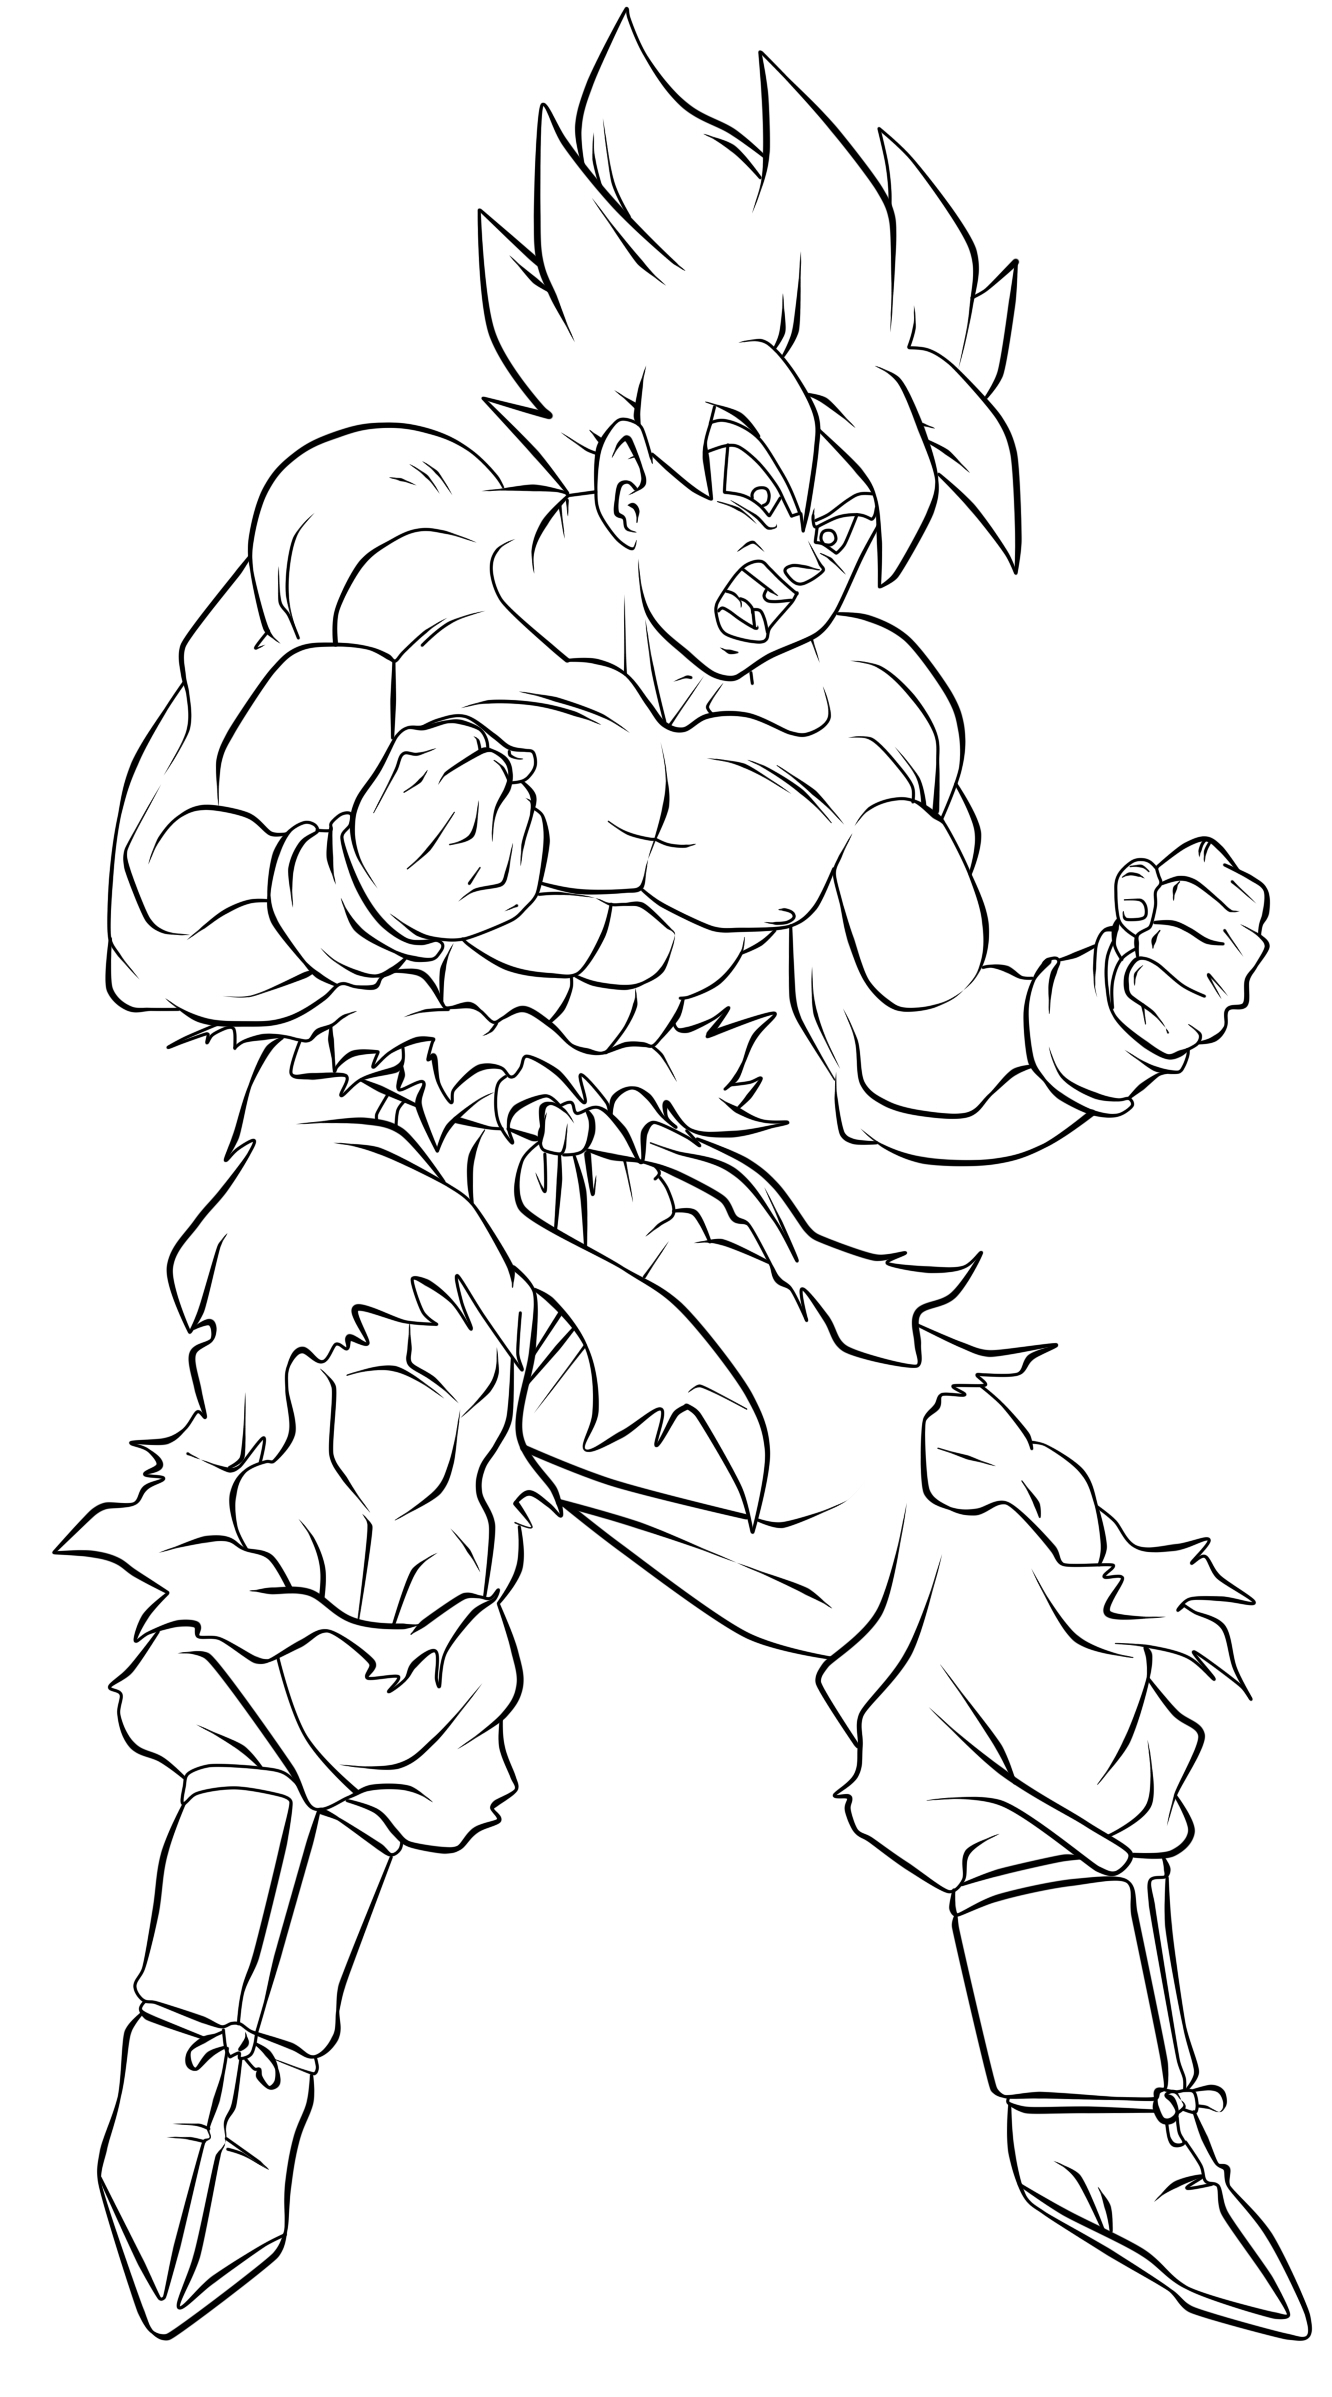 Goku Drawing Easy at GetDrawings.com | Free for personal ...